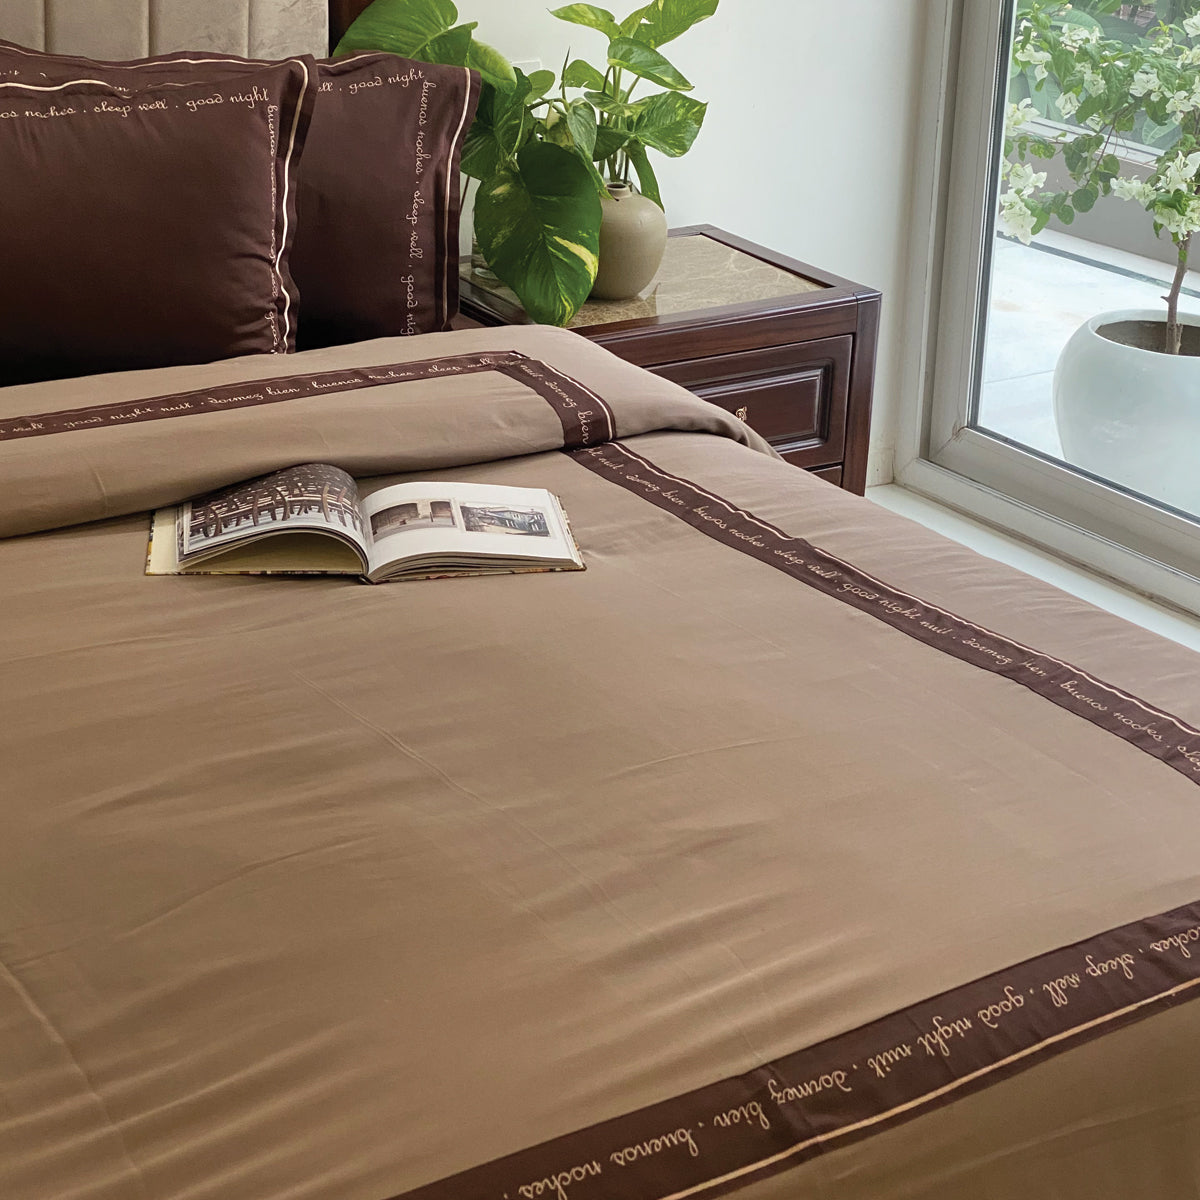 Sleep Well Good Night Coffee and Taupe Alpha Duvet Cover